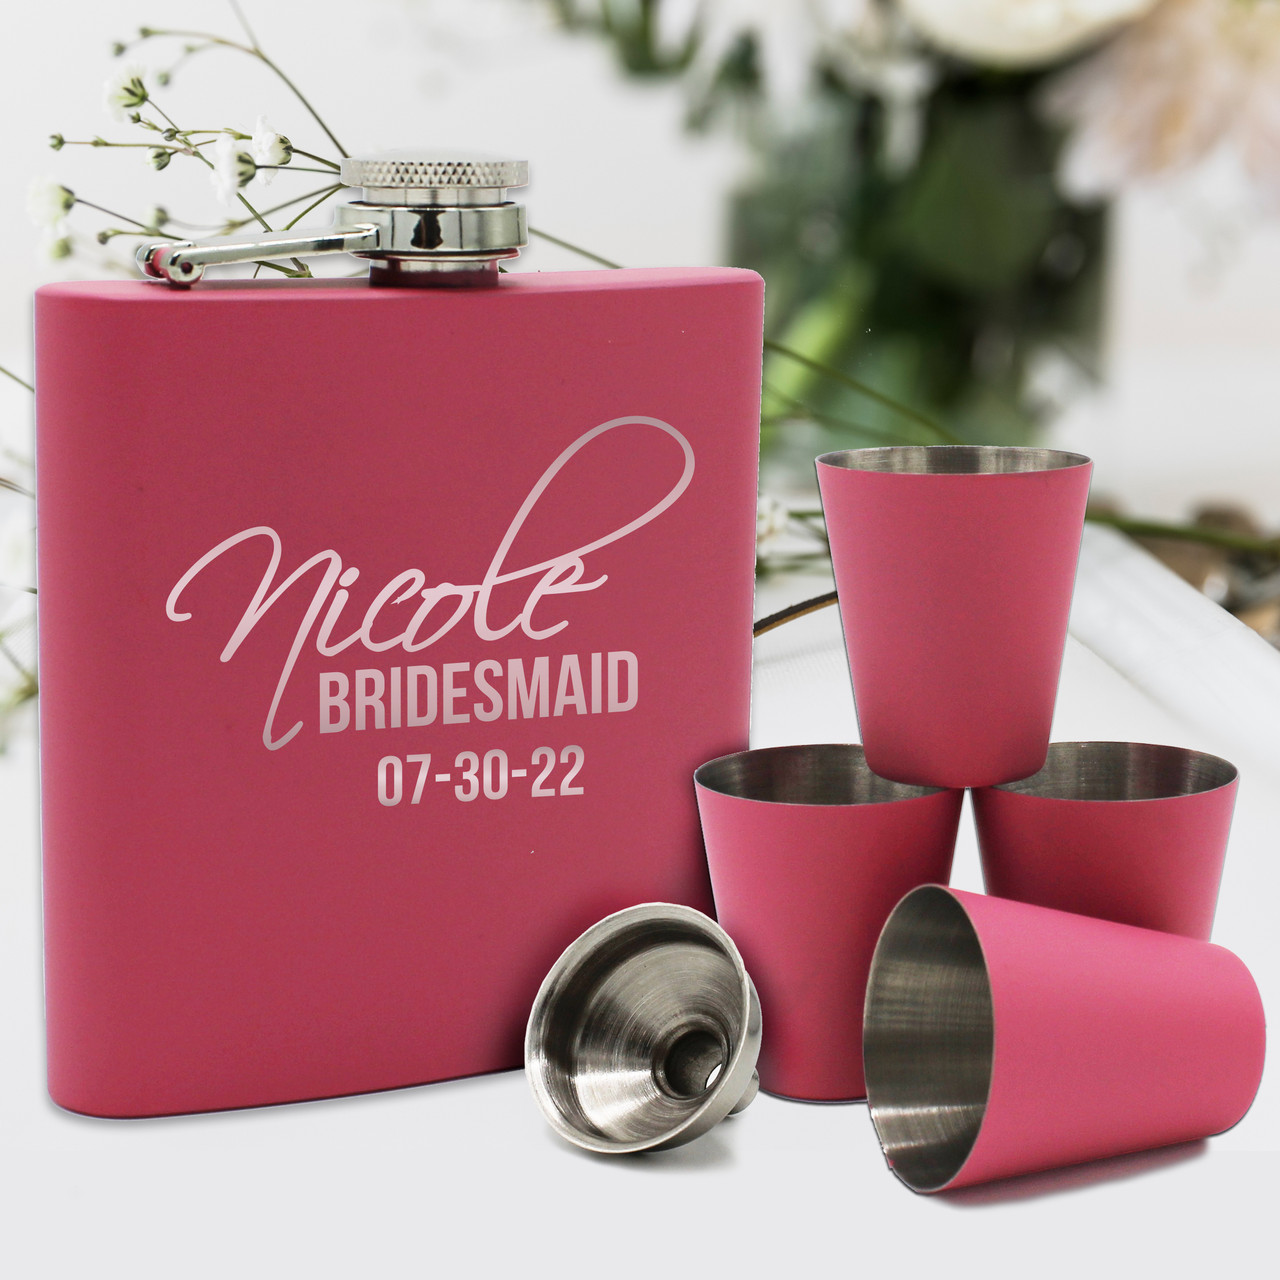 Bachelorette Party Gift Bridesmaid Flasks Pink Woman's Flask Personalized Flask for Women